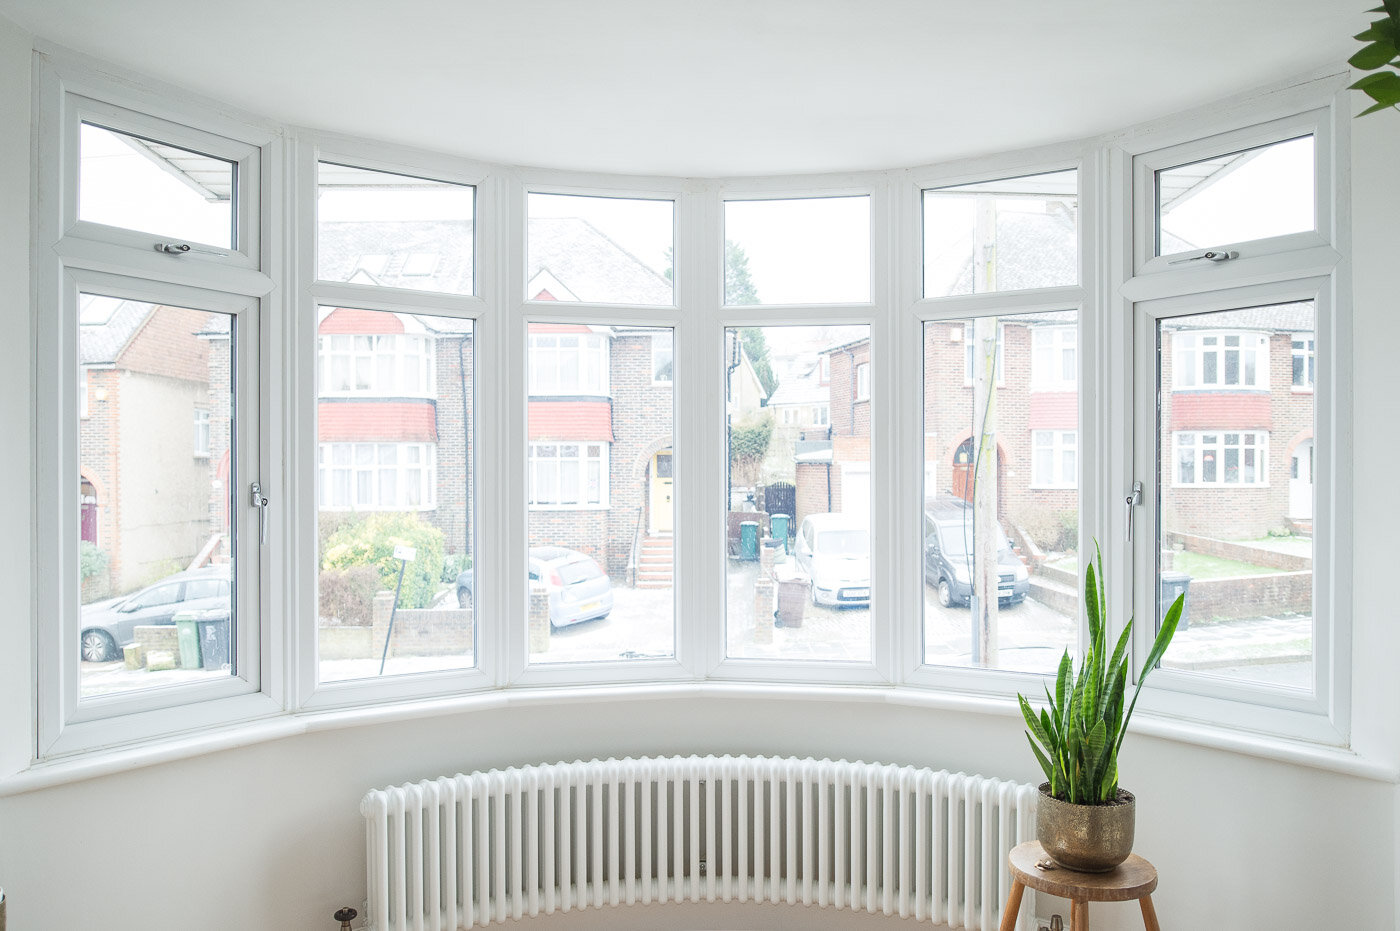 An interior view of renovated curved UPVC bay window